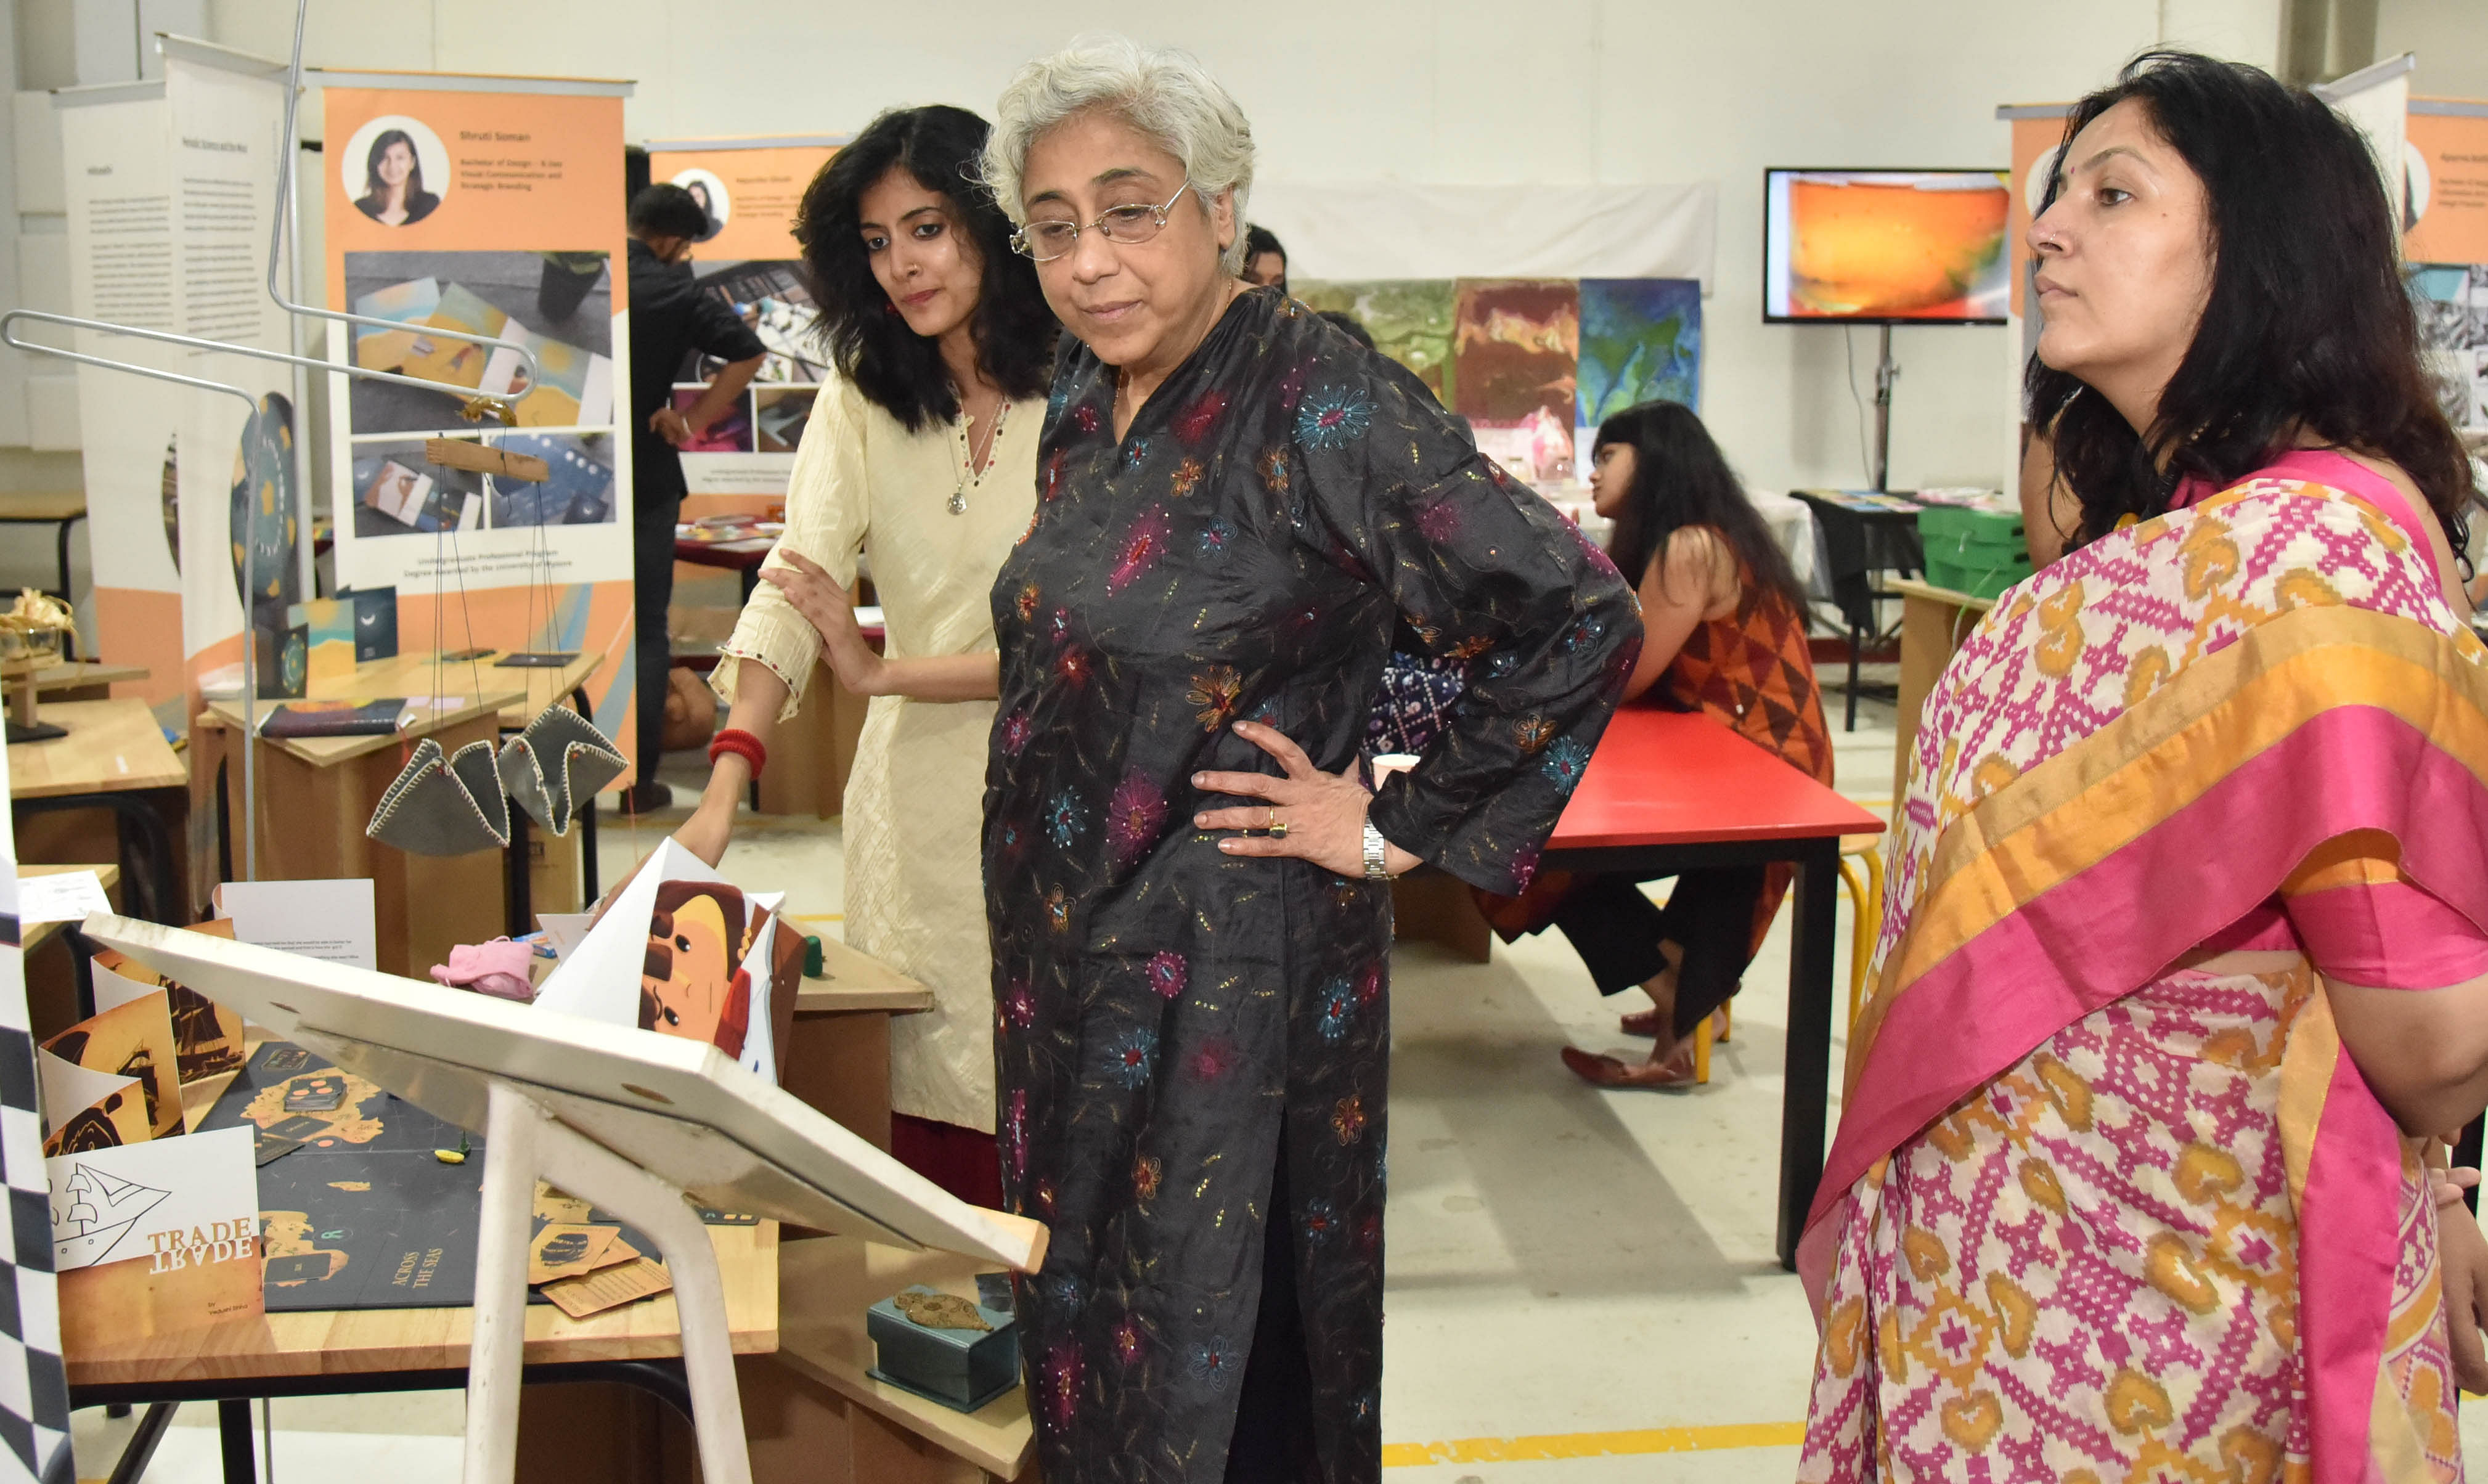 Geetha Narayanan (middle) at the annual art exhibition at Srishti Institute of Art, Design and Technology, Yelahanka. The show ends today.